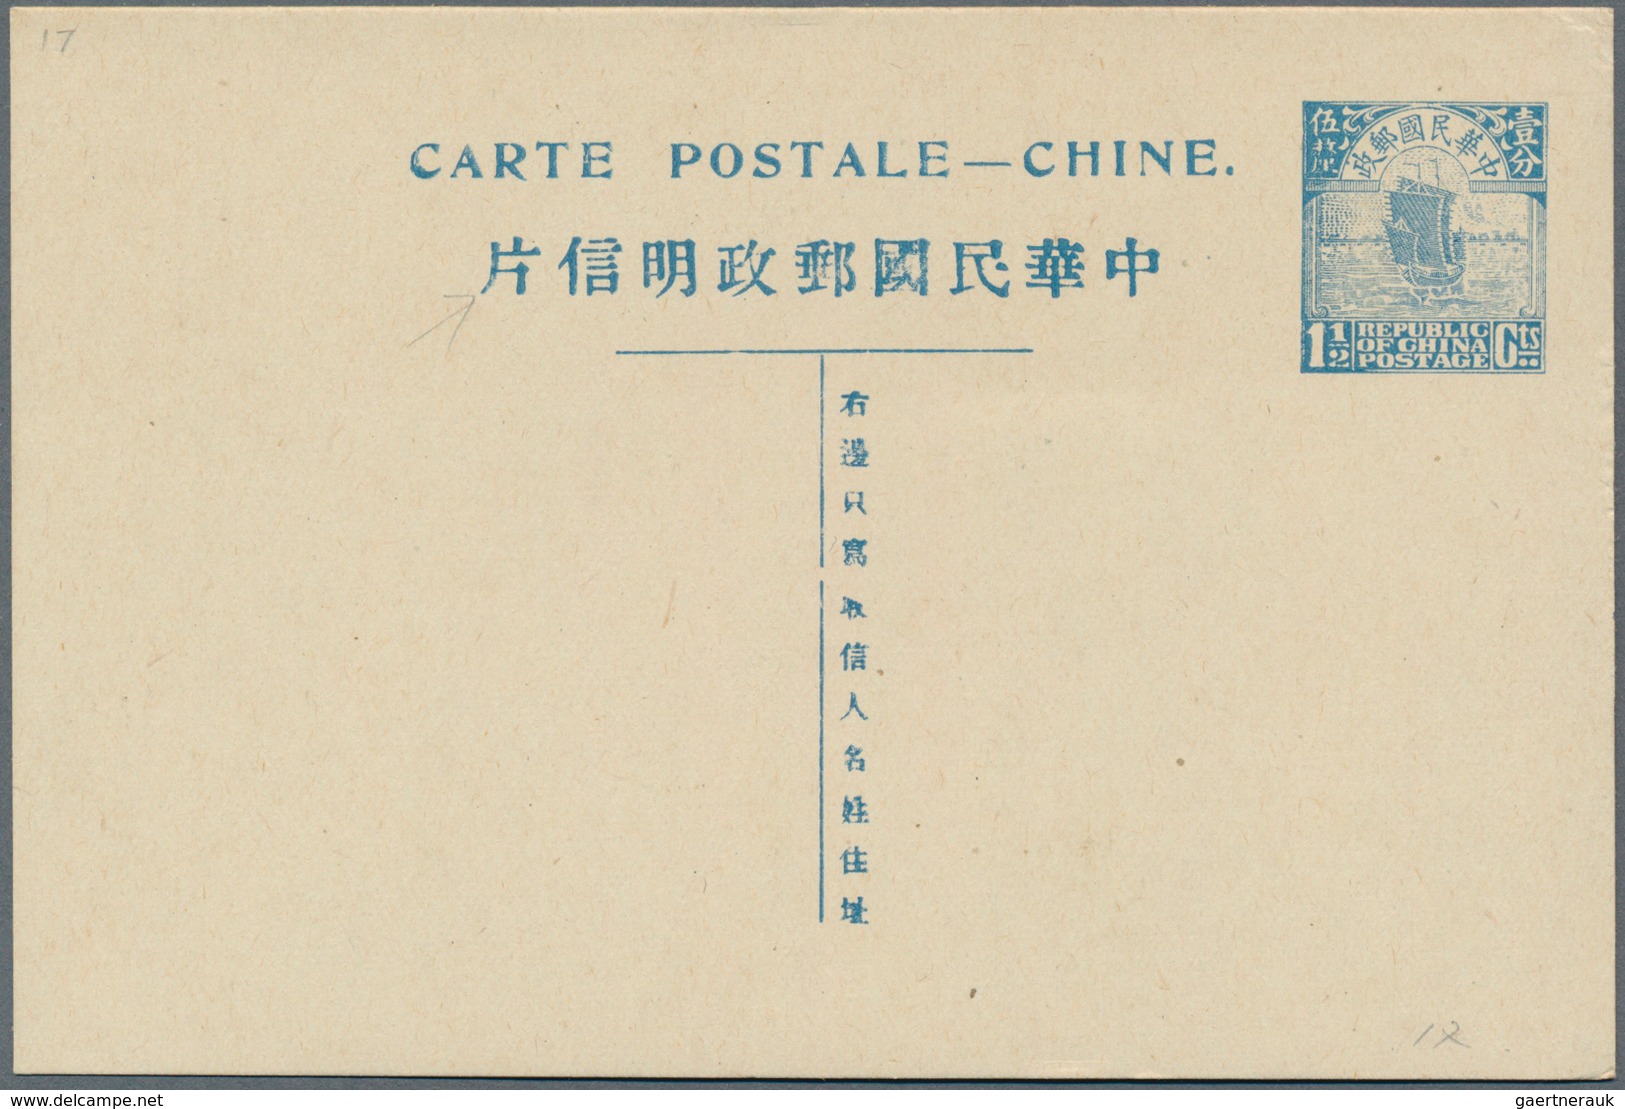 22412 China - Ganzsachen: 1897/1936 (ca.), mint lot stationery (9 inc. double cards x5), x2-ex part toning